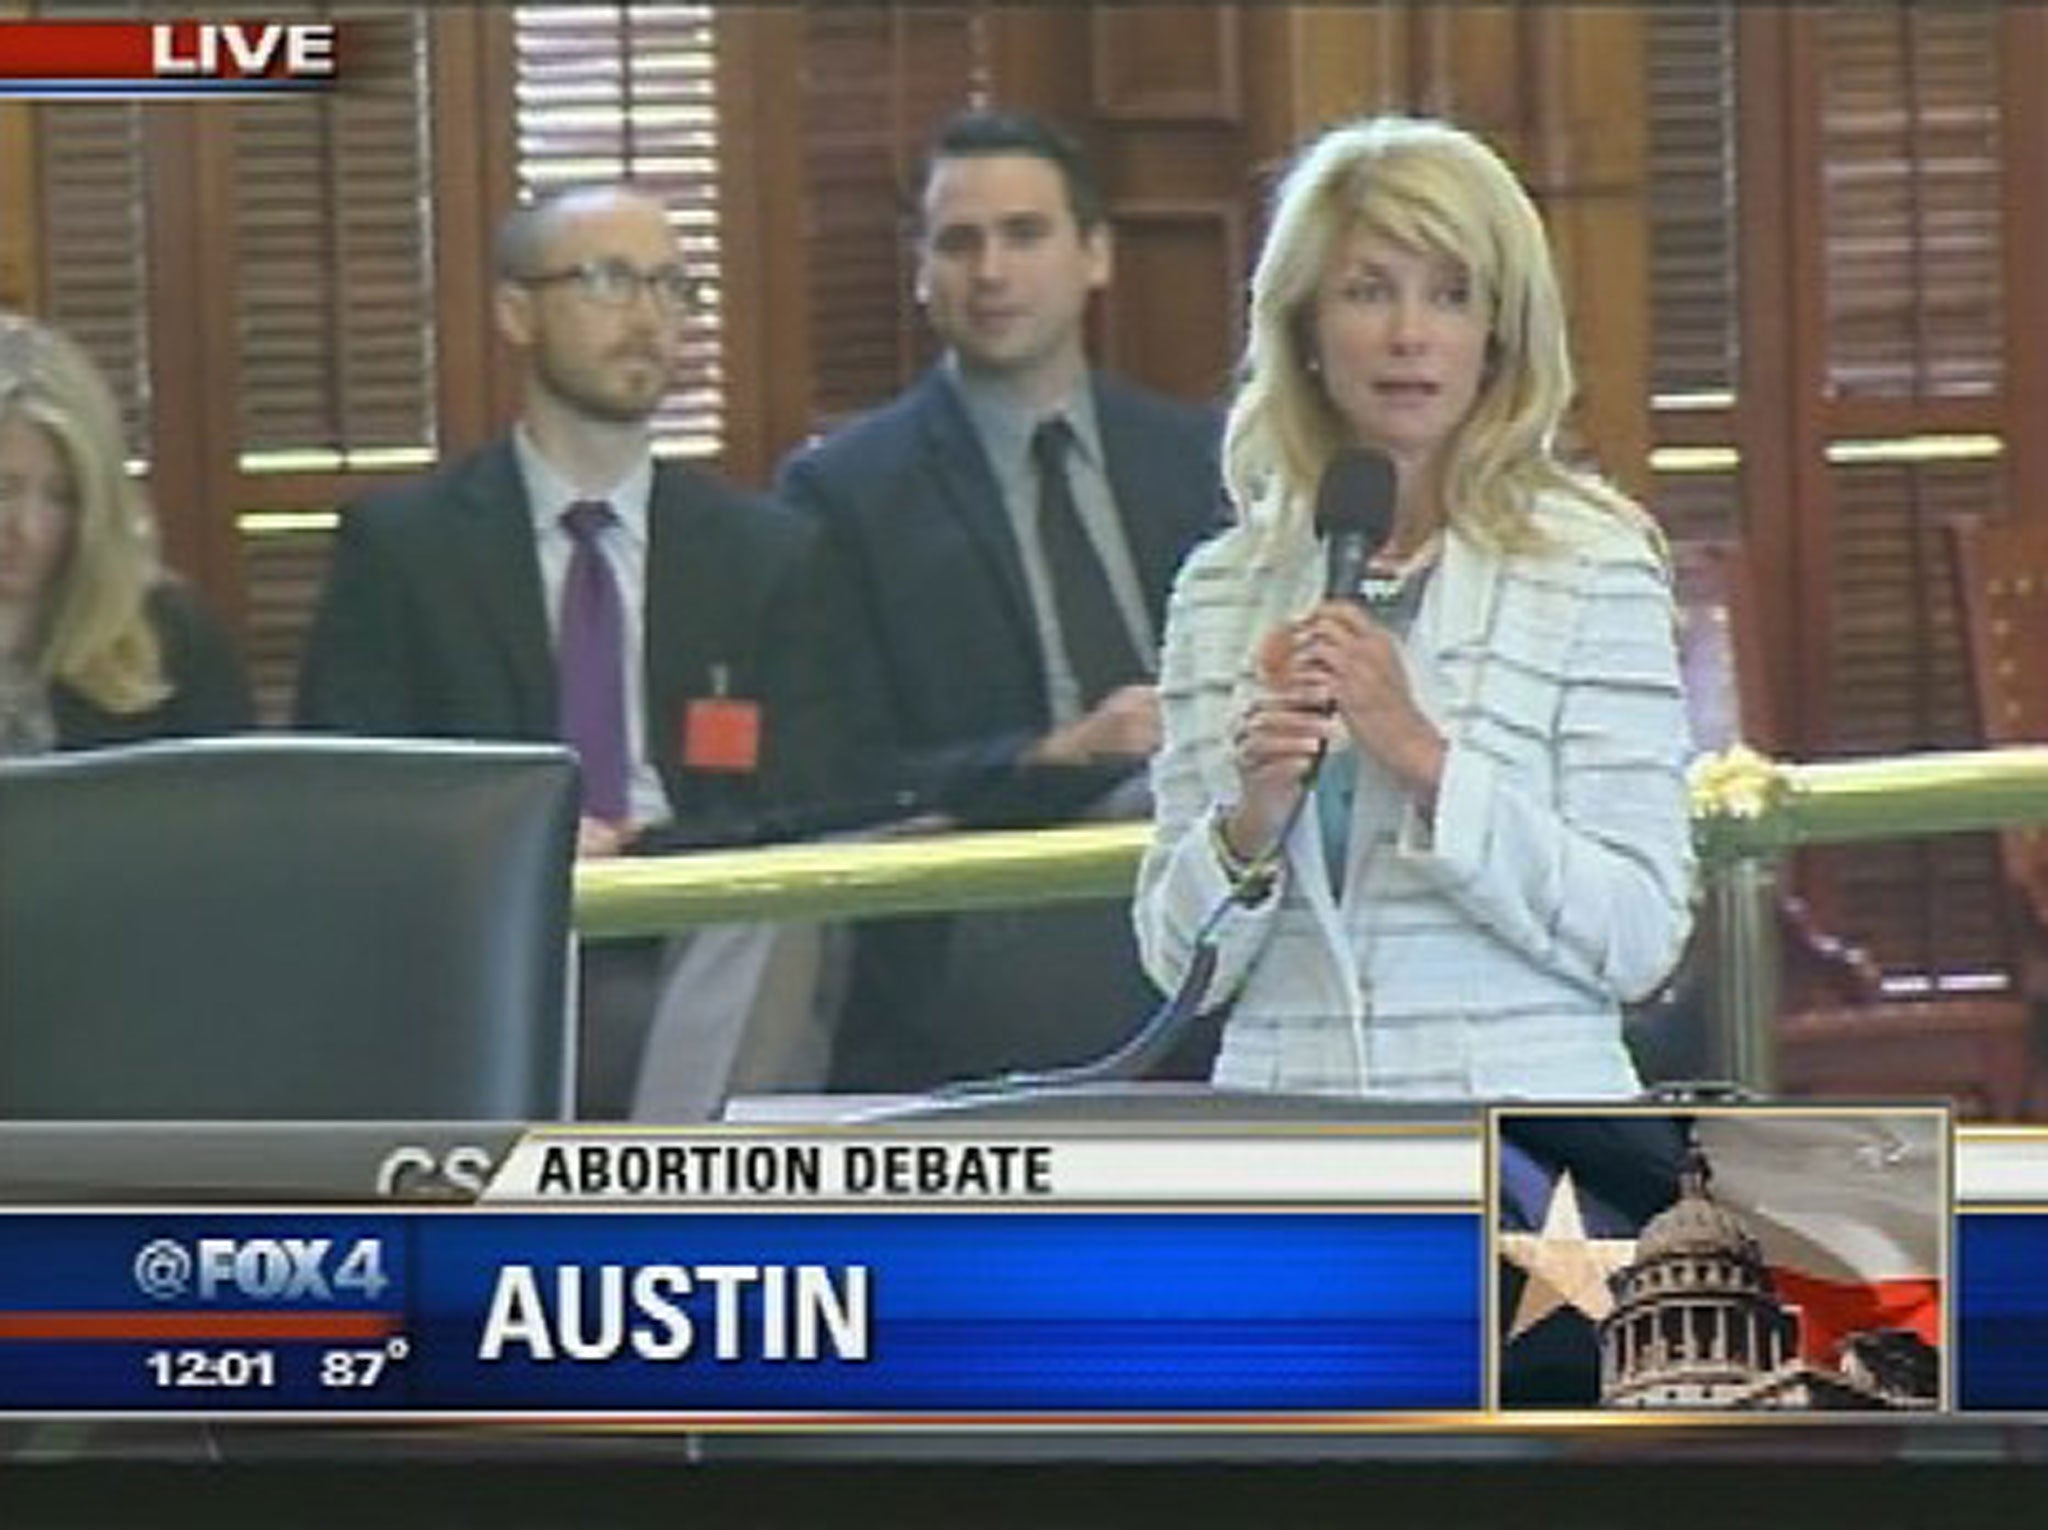 Wendy Davis filibusters to ensure that the bill to close most of Texas’s abortion clinics and ban abortion after 20 weeks of pregnancy misses its midnight deadline, June 25th, 2013